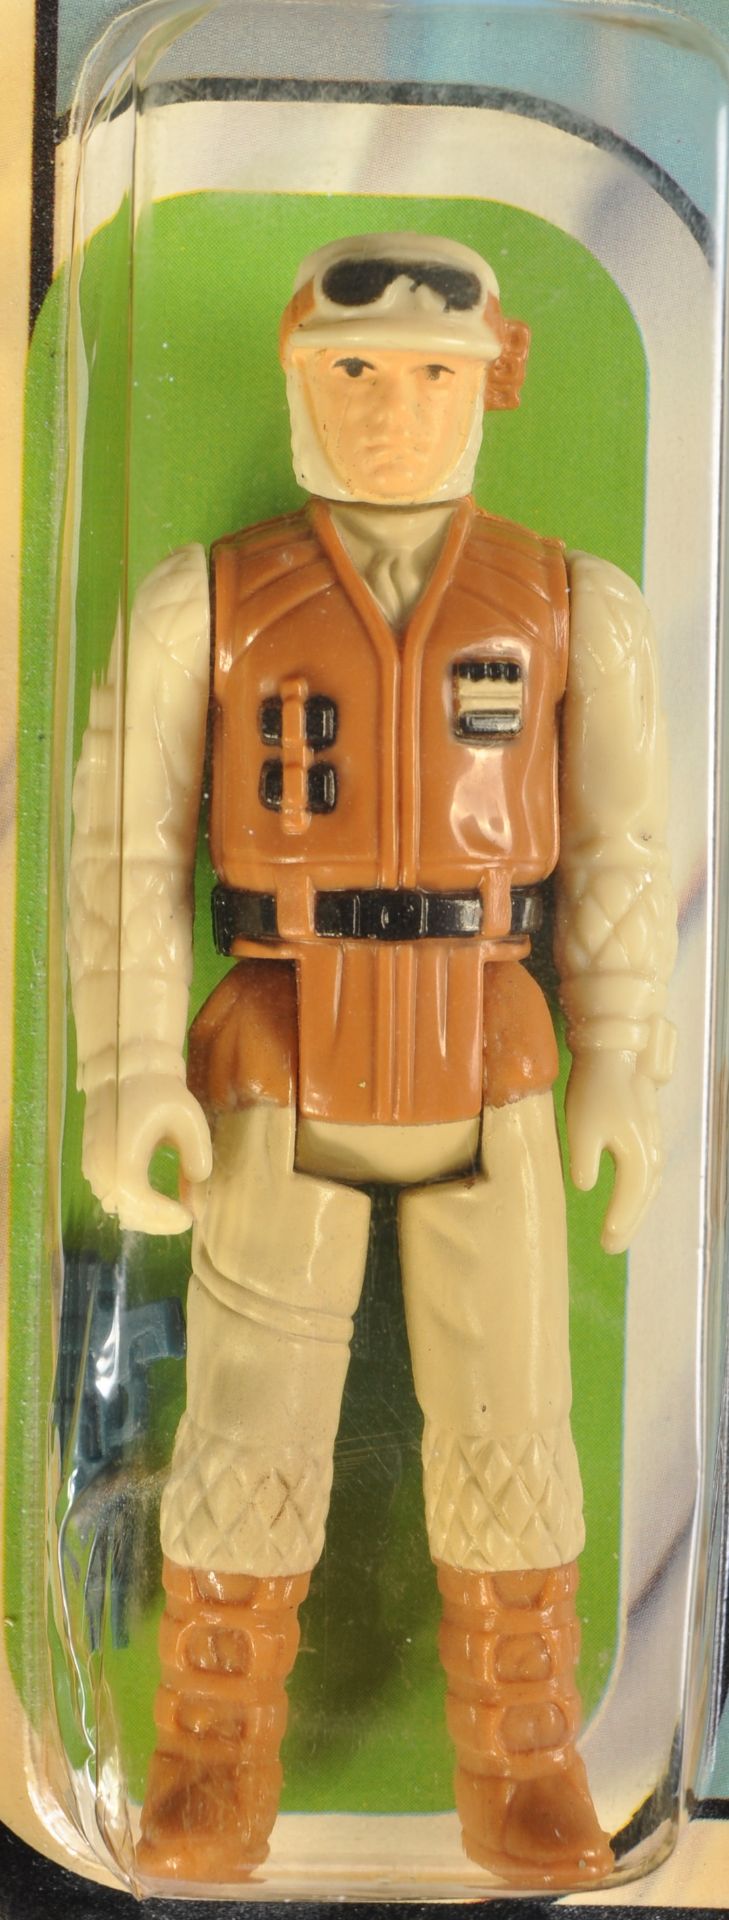 STAR WARS - FACTORY ERROR MISCARD FRENCH MOC ACTION FIGURE - Image 3 of 6